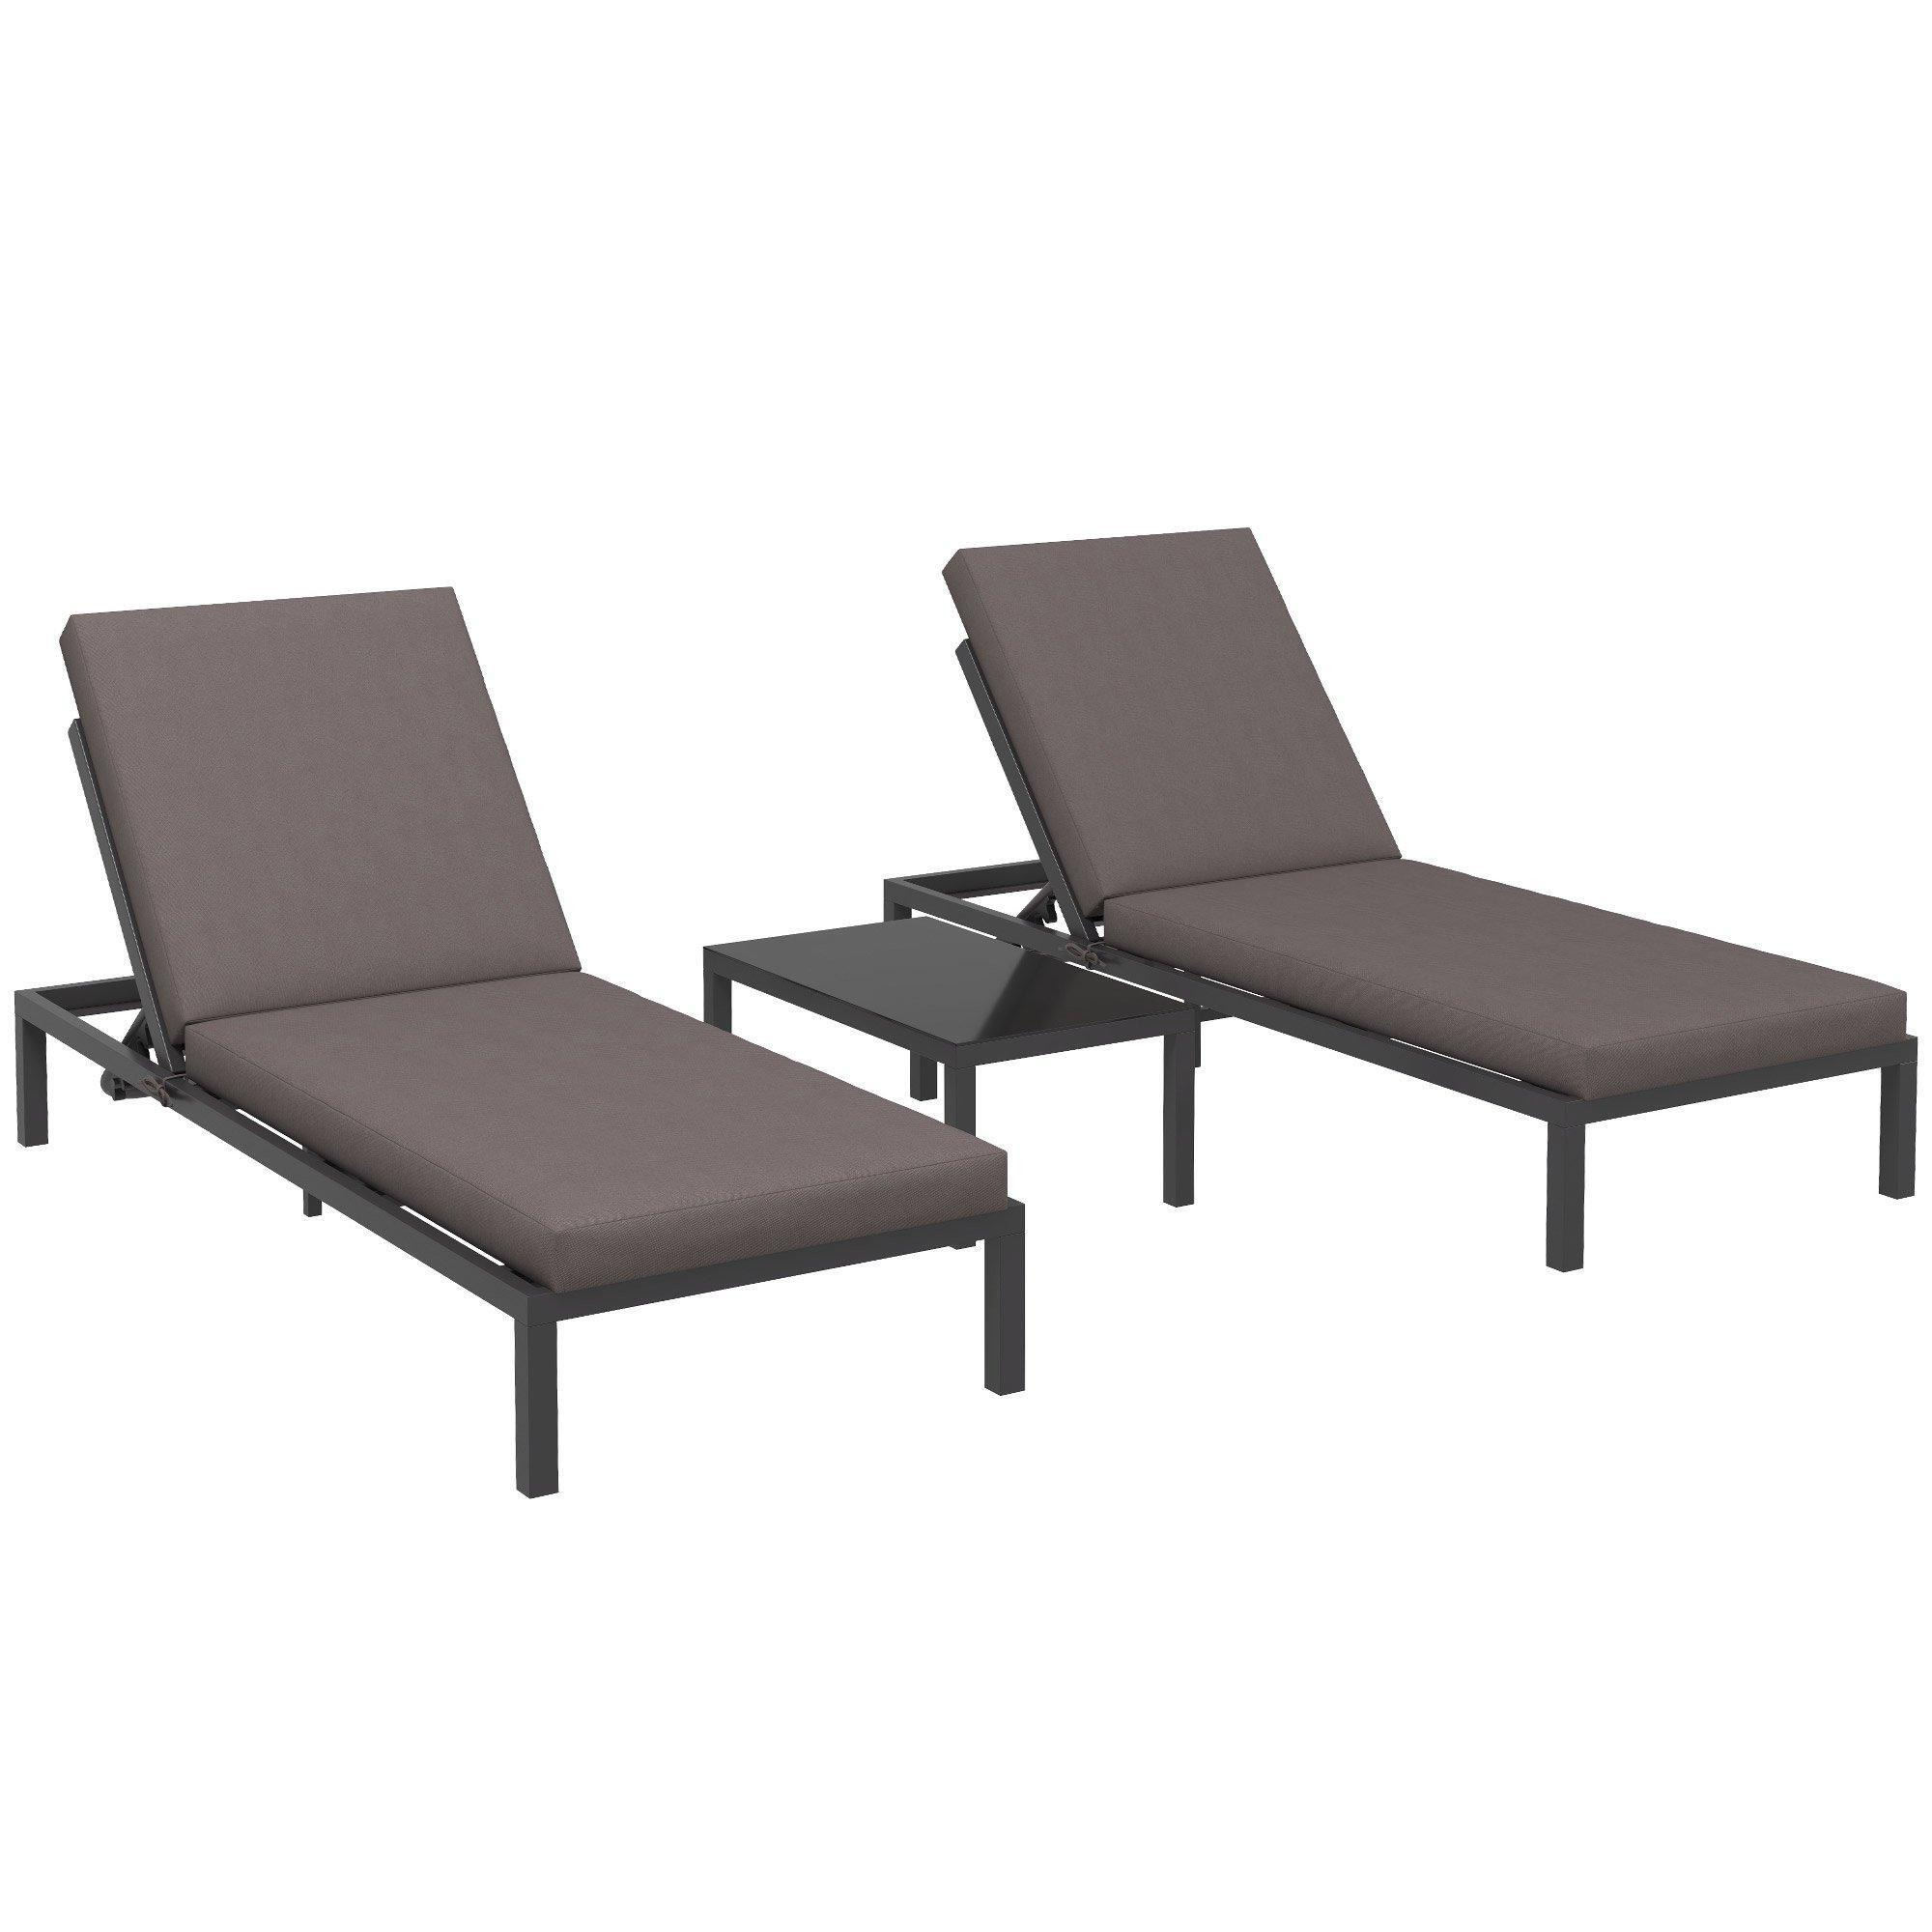 Rattan Lounge Set with Adjustable Back, 2-in-1 Aluminium Recliner Sofa Bed, Grey - image 1